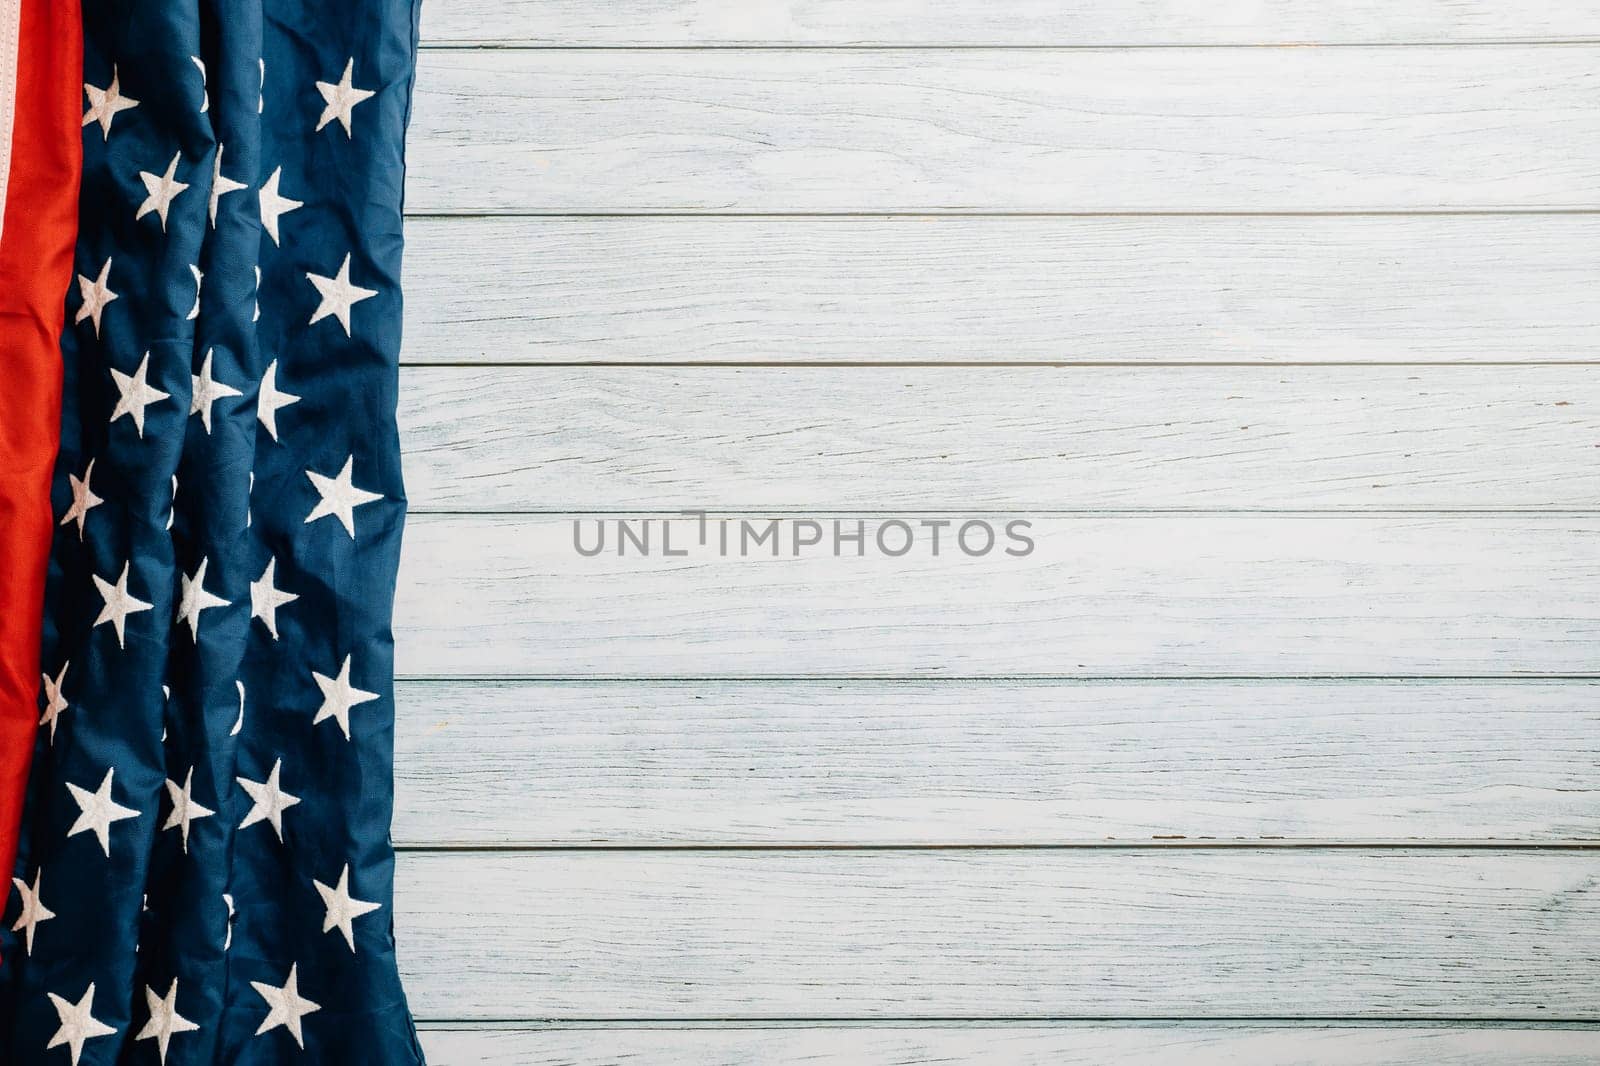 A patriotic scene for Veterans Day, American flags on a wooden background, symbolizing honor, pride, and democracy. November 11 is a day to celebrate our veterans.